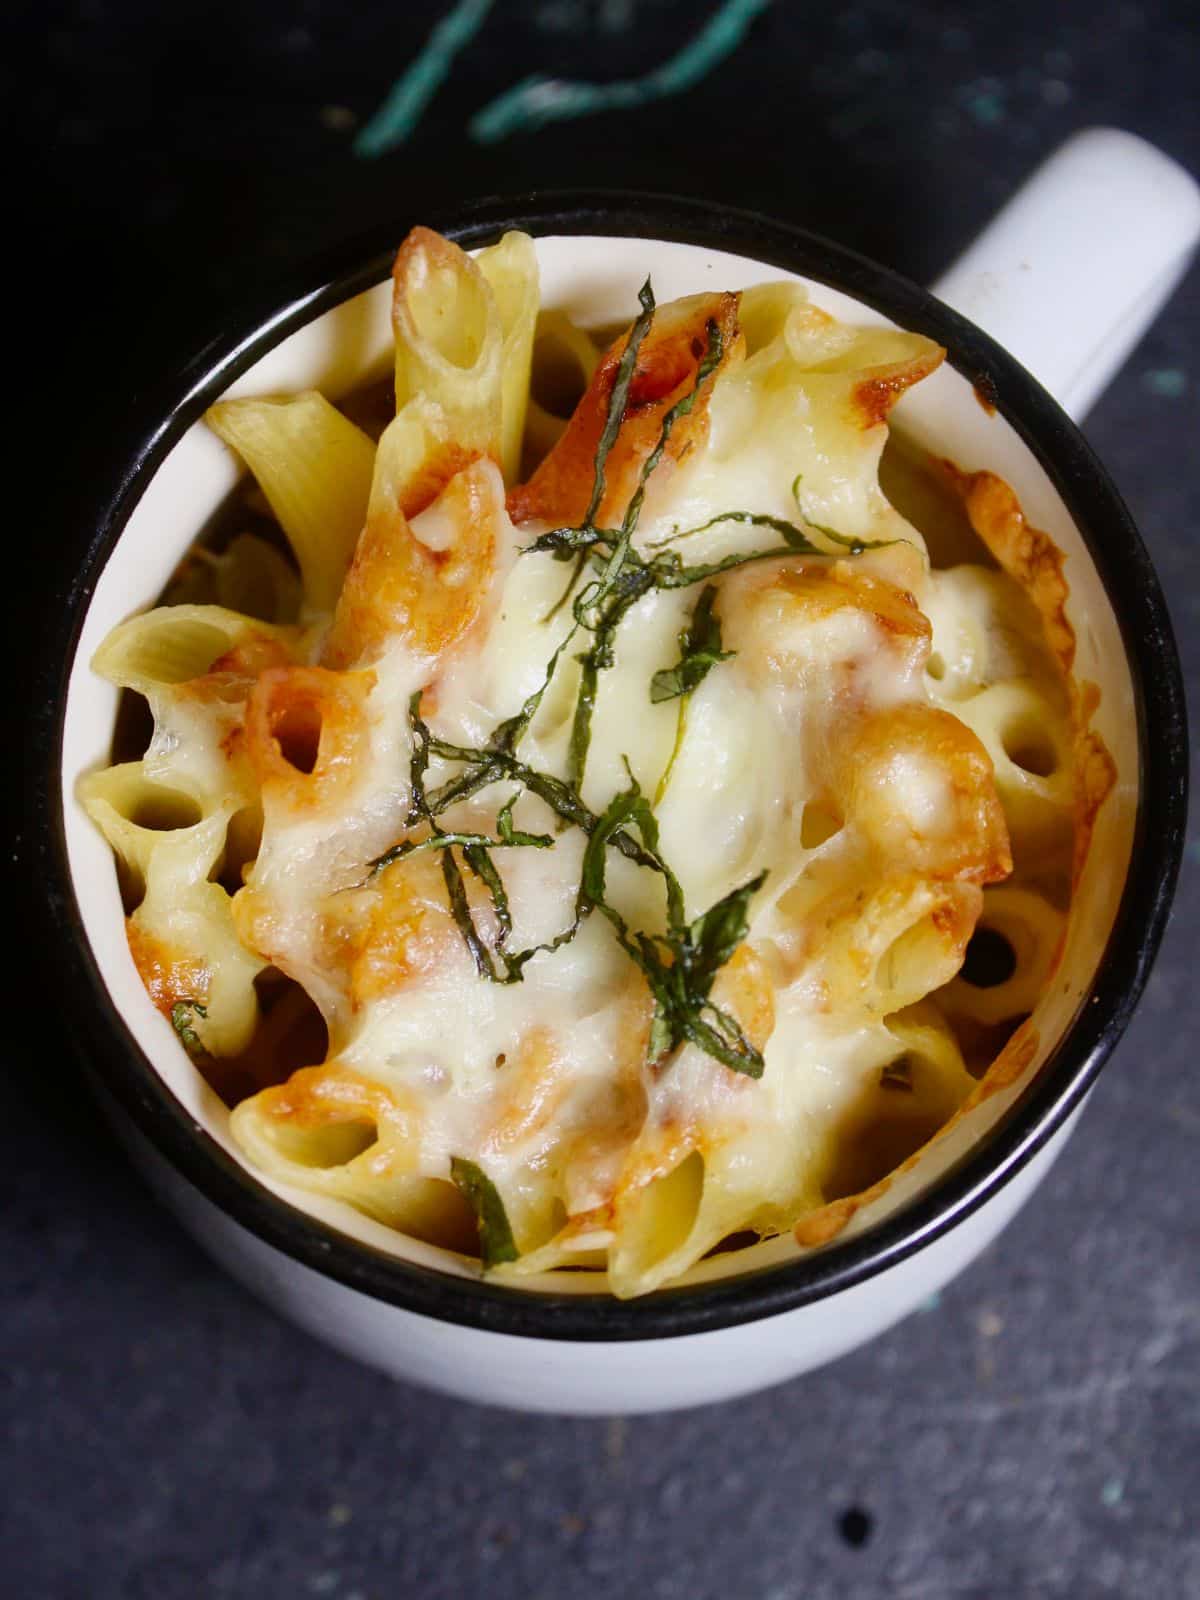 Zoom in image of delicious Baked Penne Pasta in a Cup 